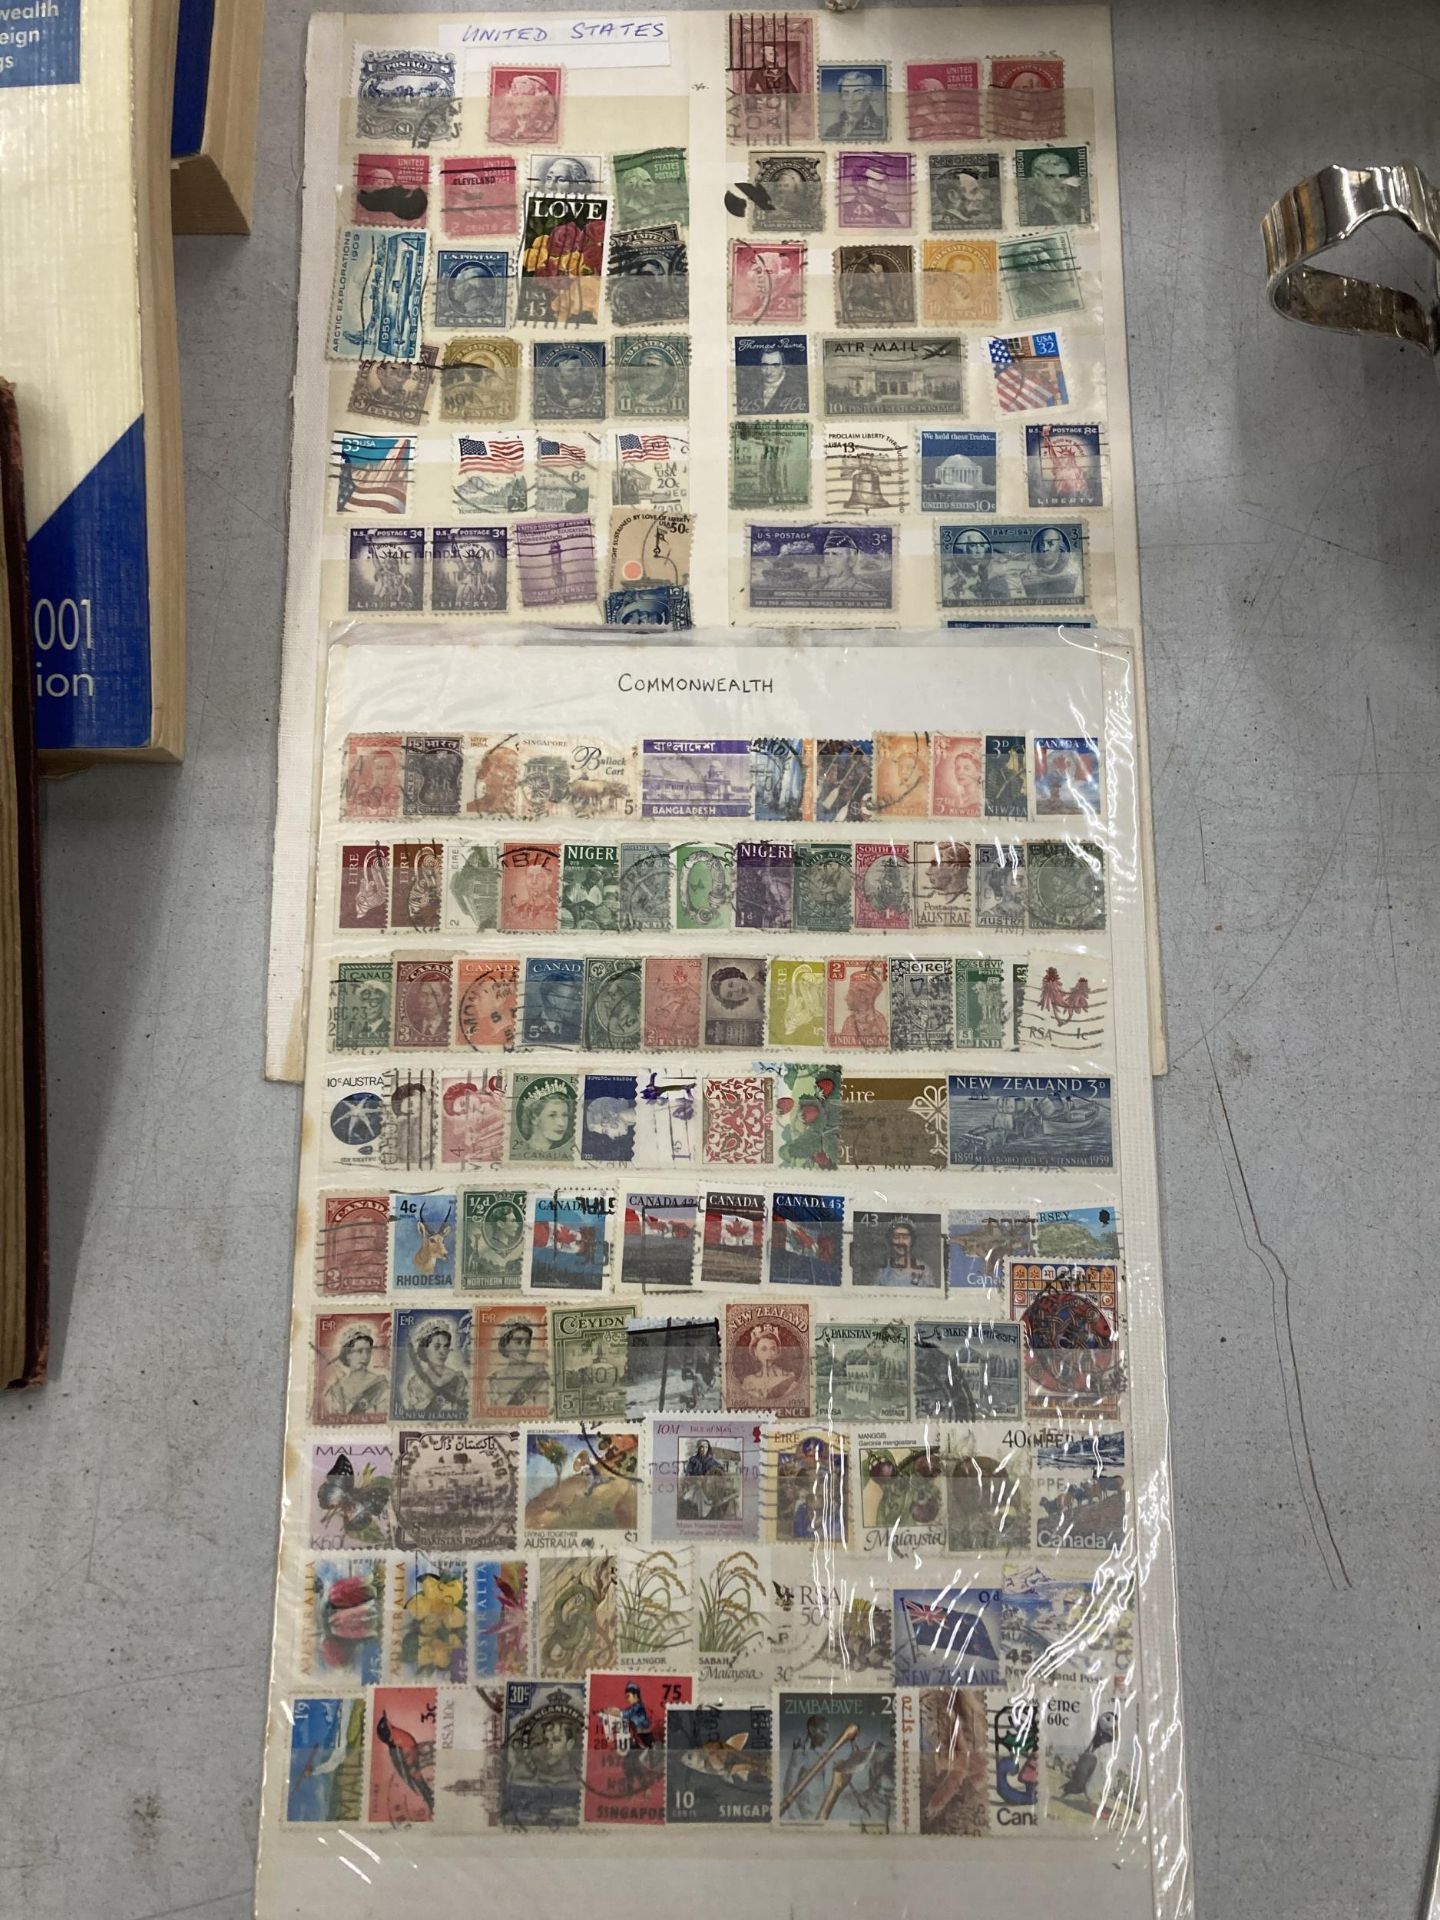 A COLLECTION OF STAMPS, COMMENWEALTH EXAMPLES ON SHEETS, WORLD POSTAGE ALBUM, STANLEY GIBBONS - Bild 4 aus 8